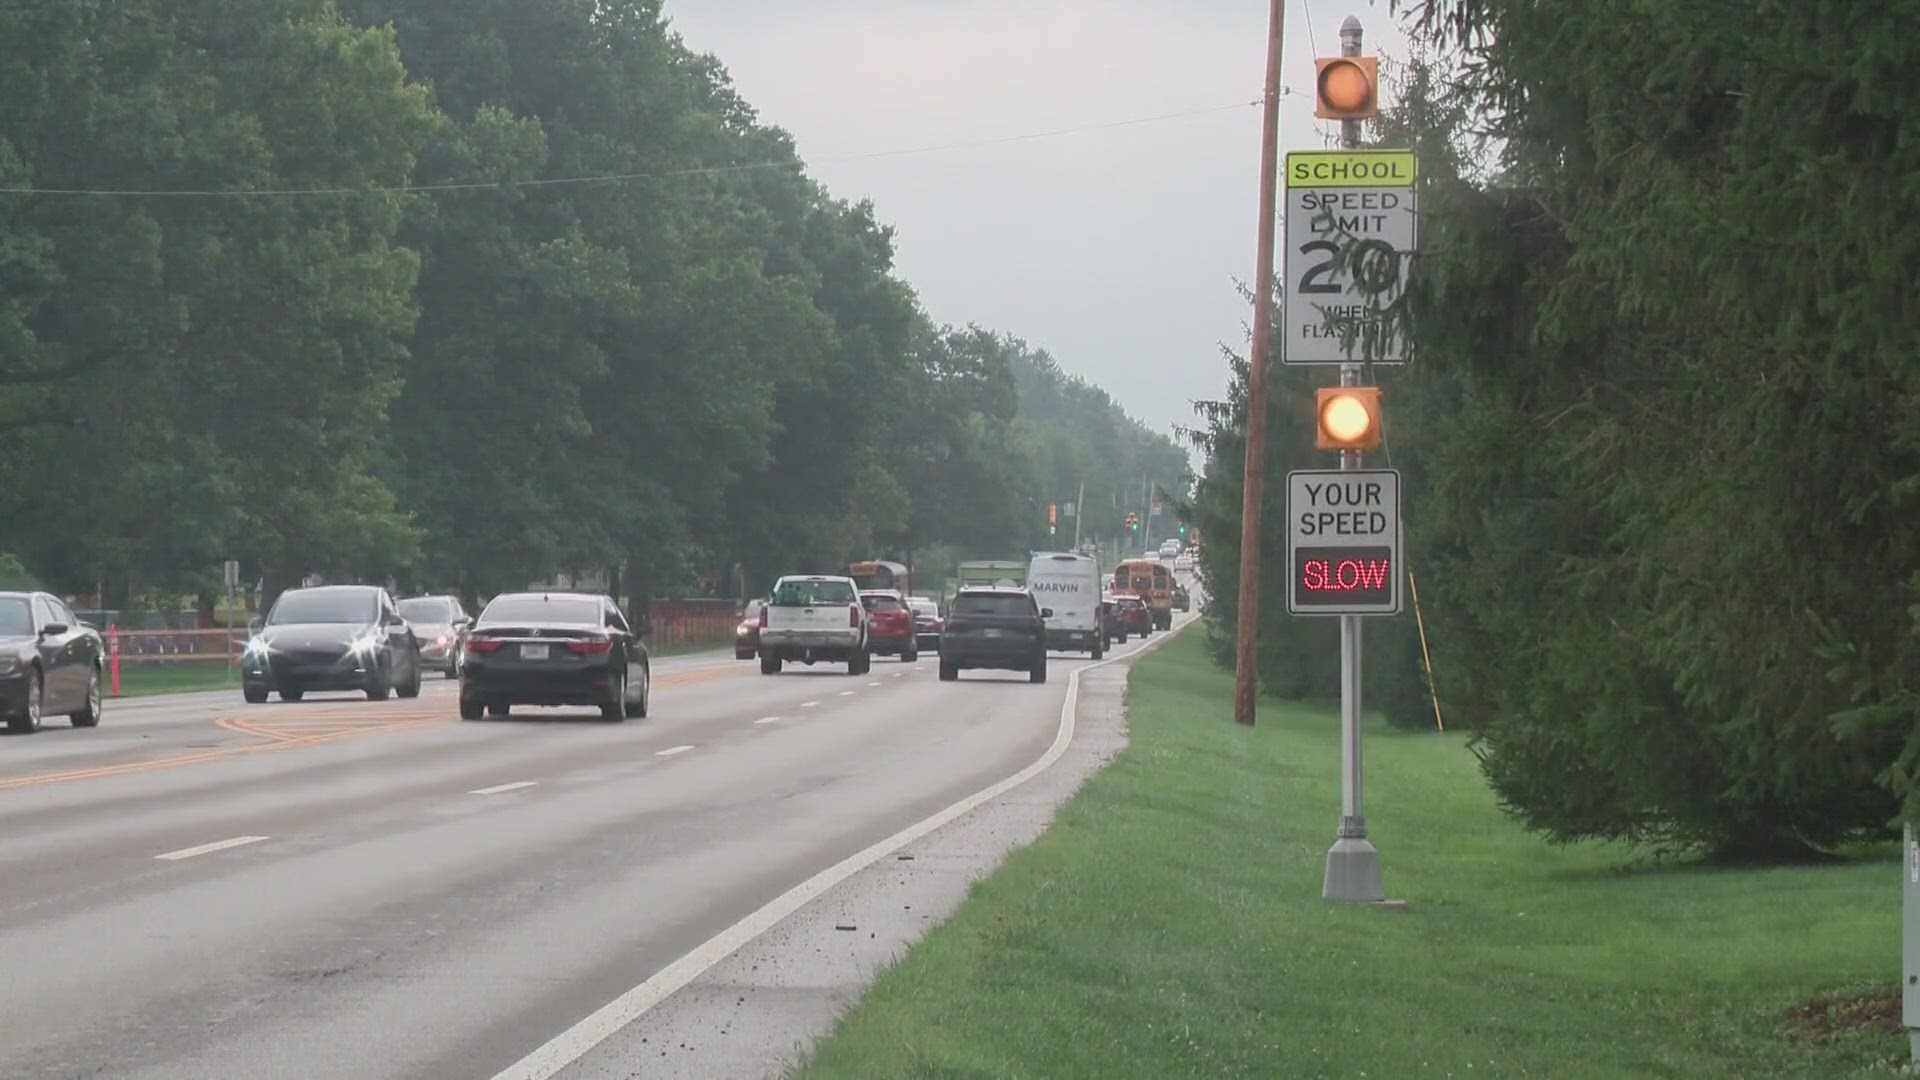 In 2022, Columbus police issued approximately 1,400 traffic citations for school zone violations. So far in 2023, officers have issued more than 500 tickets.